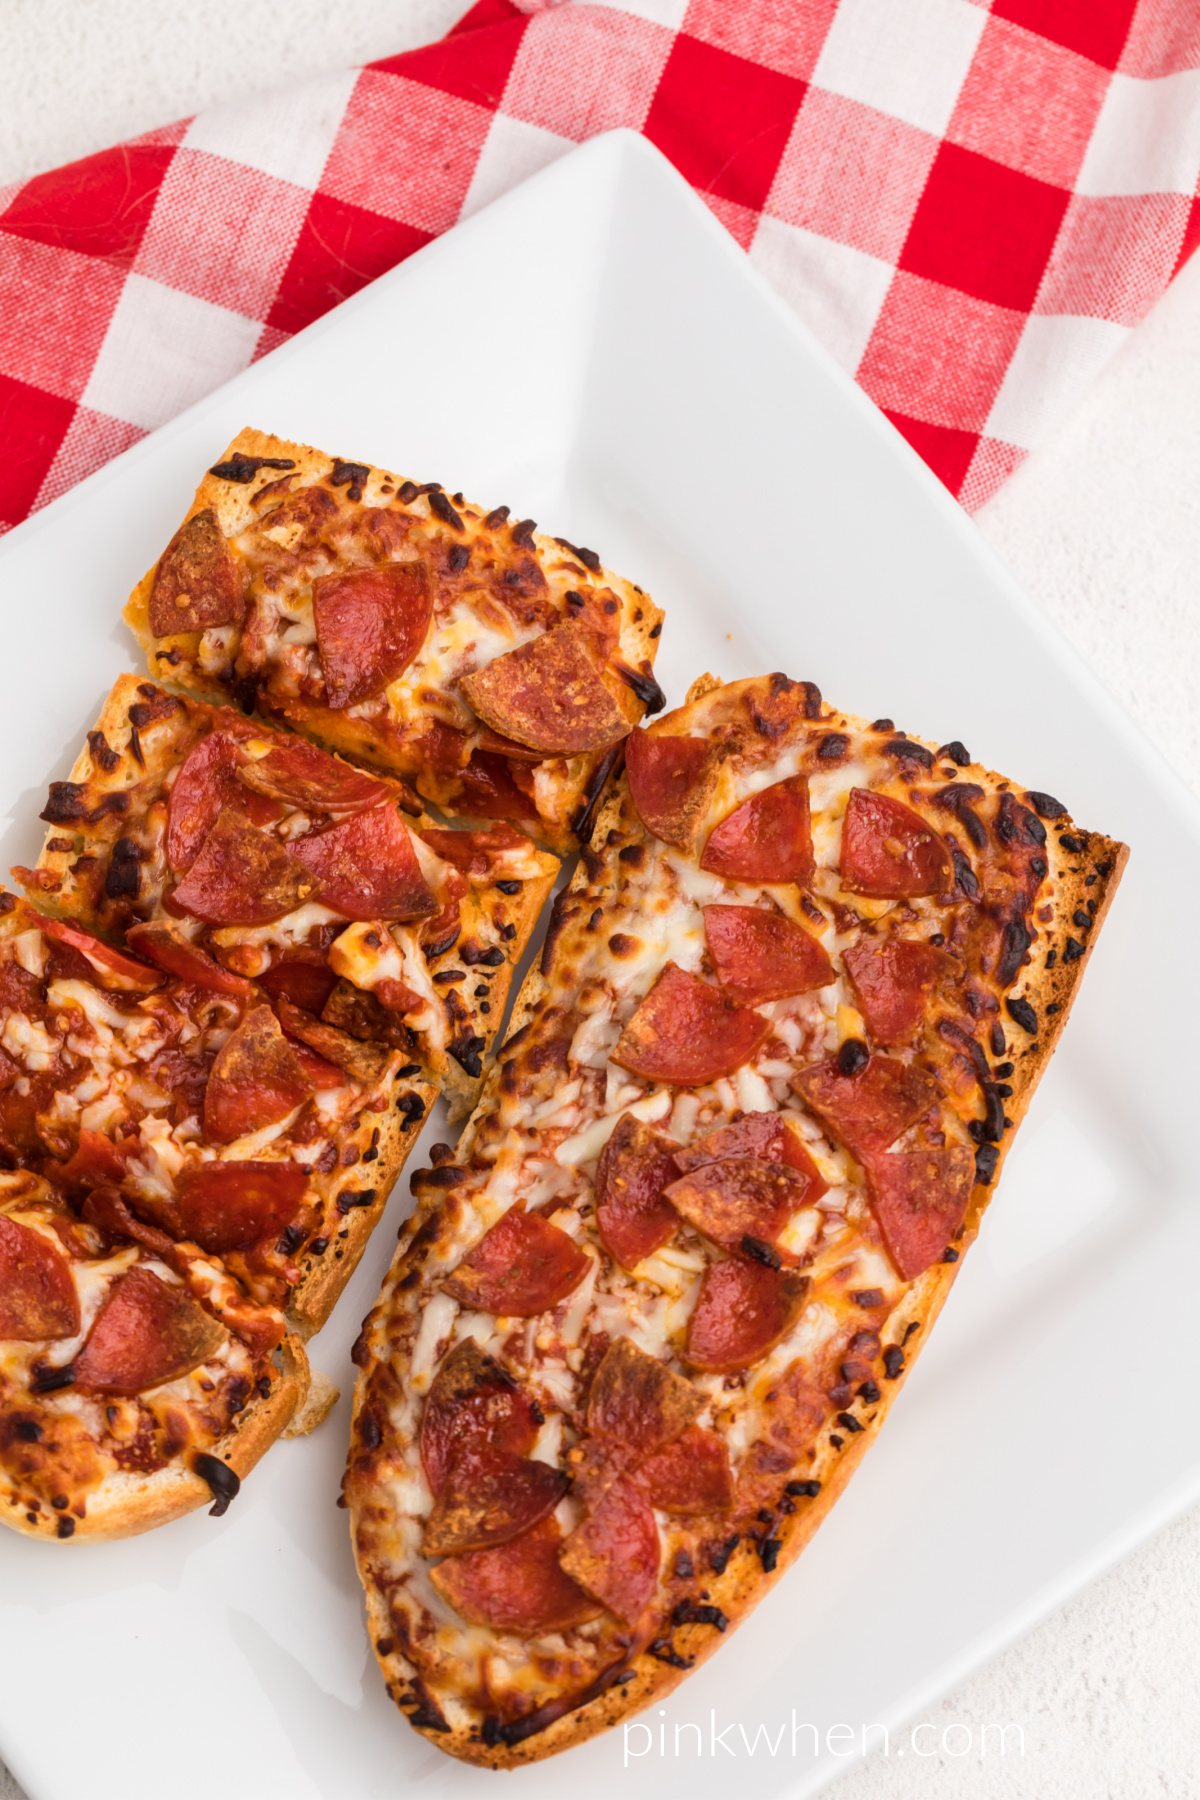 Air fryer french bread pizzas fully cooked and served on a white plate. 